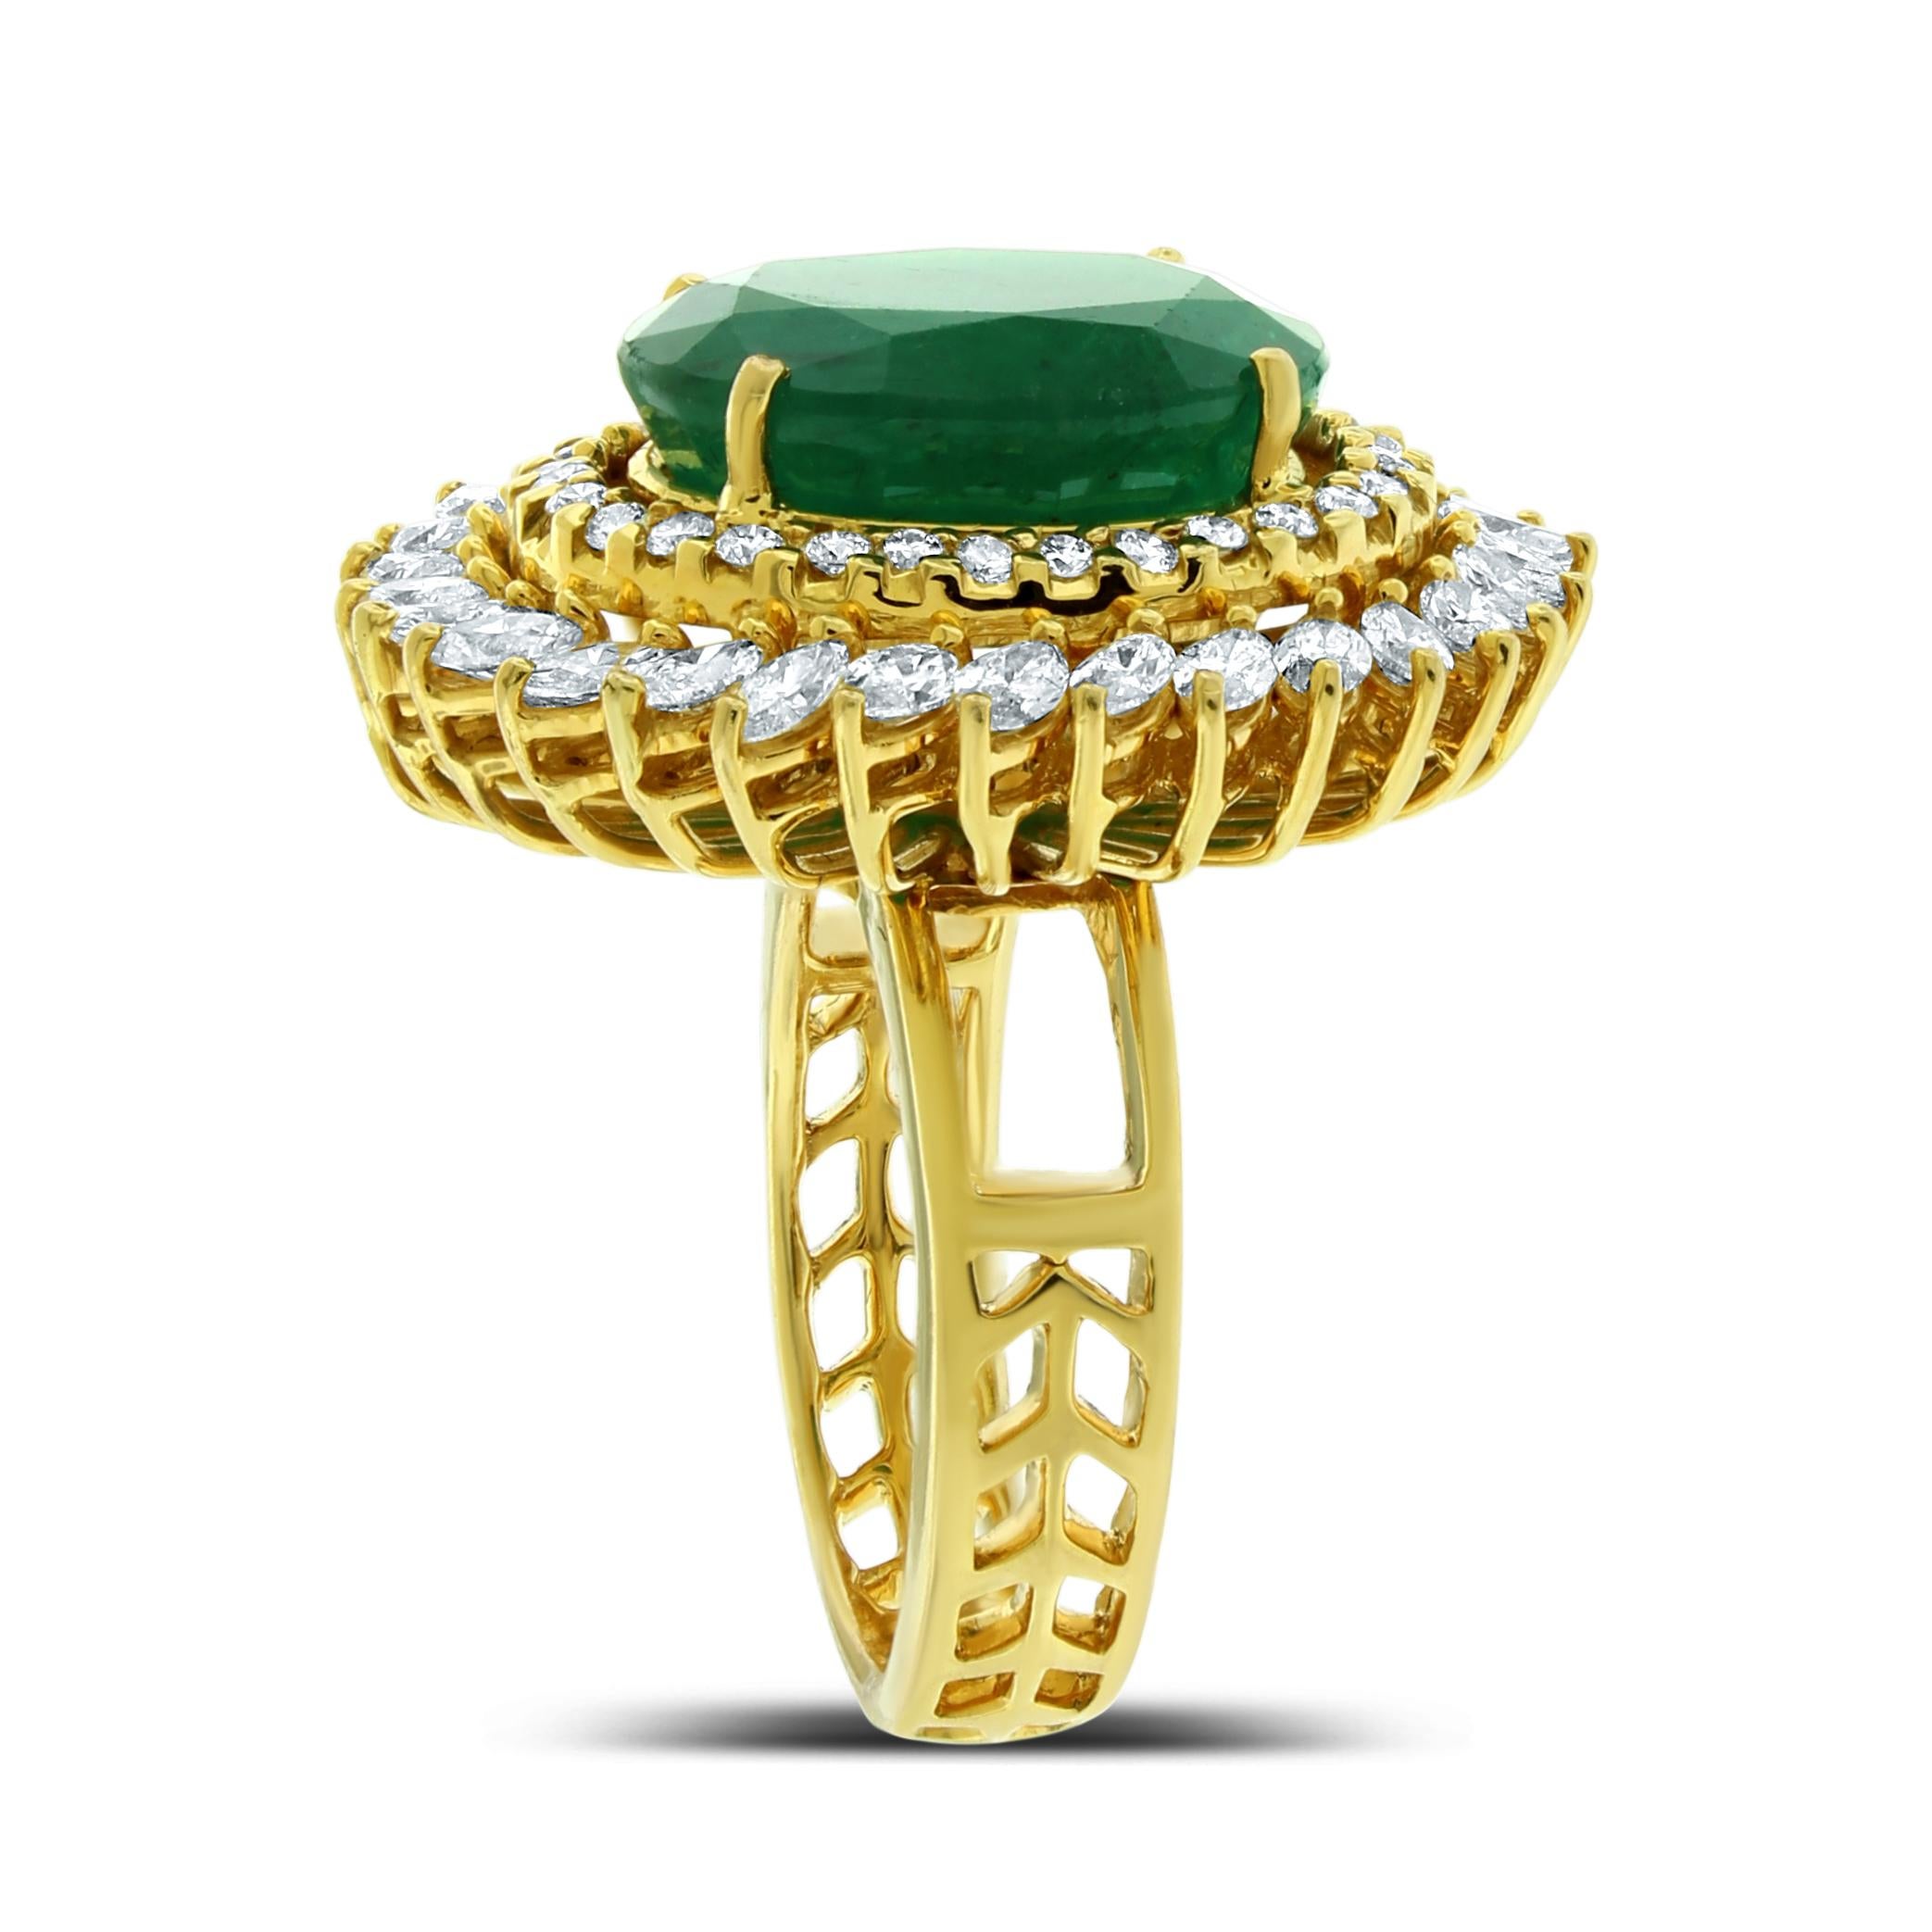 The Shanaya Ring is a statement piece showcases an oversized Emerald cradled with lustrous halos of round and marquise diamond. It is bold and impressive.

Gemstone Type: Emerald
Gemstone Shape: Oval
Gemstone Weight: 8.40 ct 
Gemstone Color: